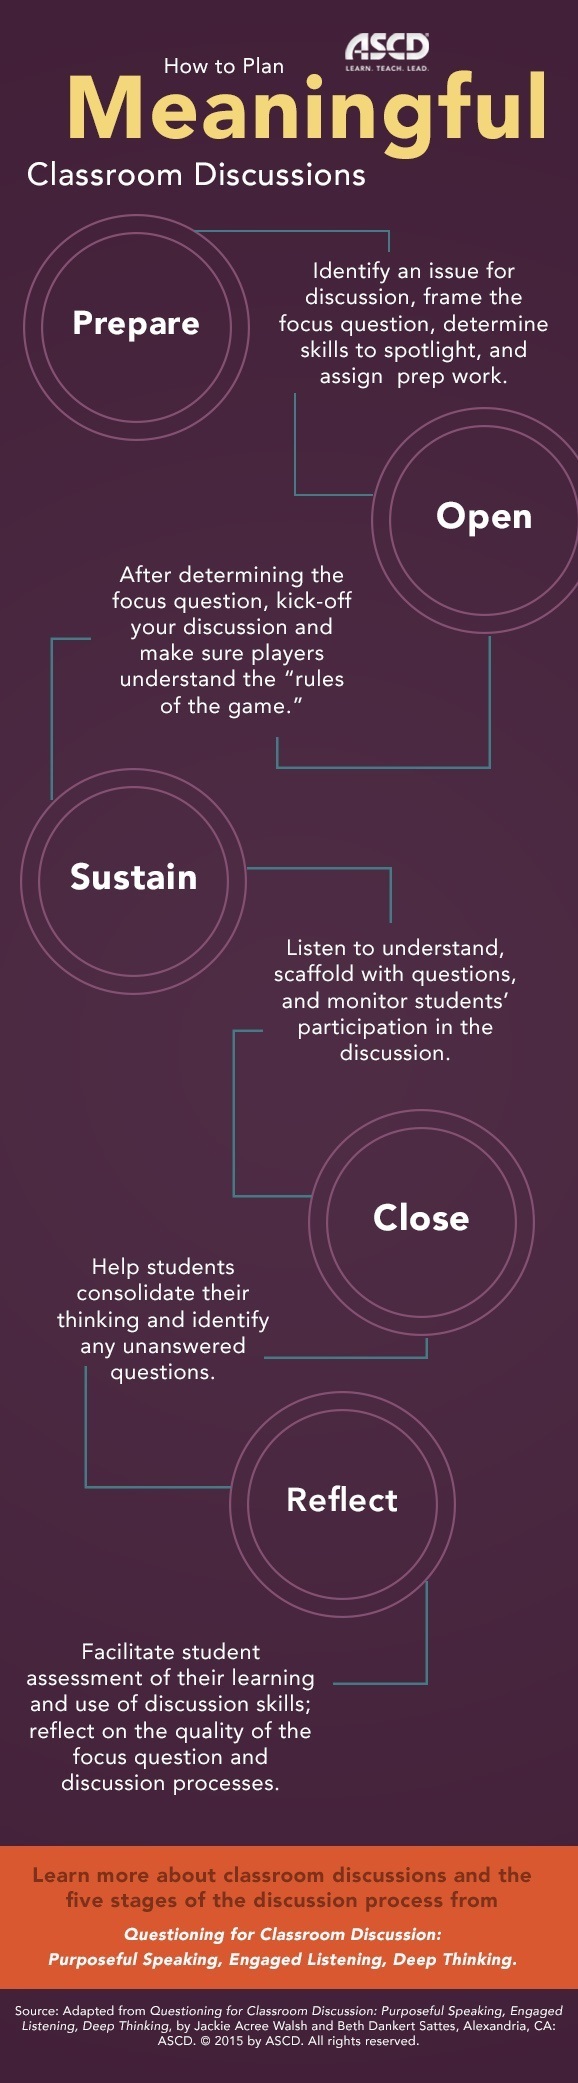 How to Plan Meaningful Classroom Discussions Infographic eLearning